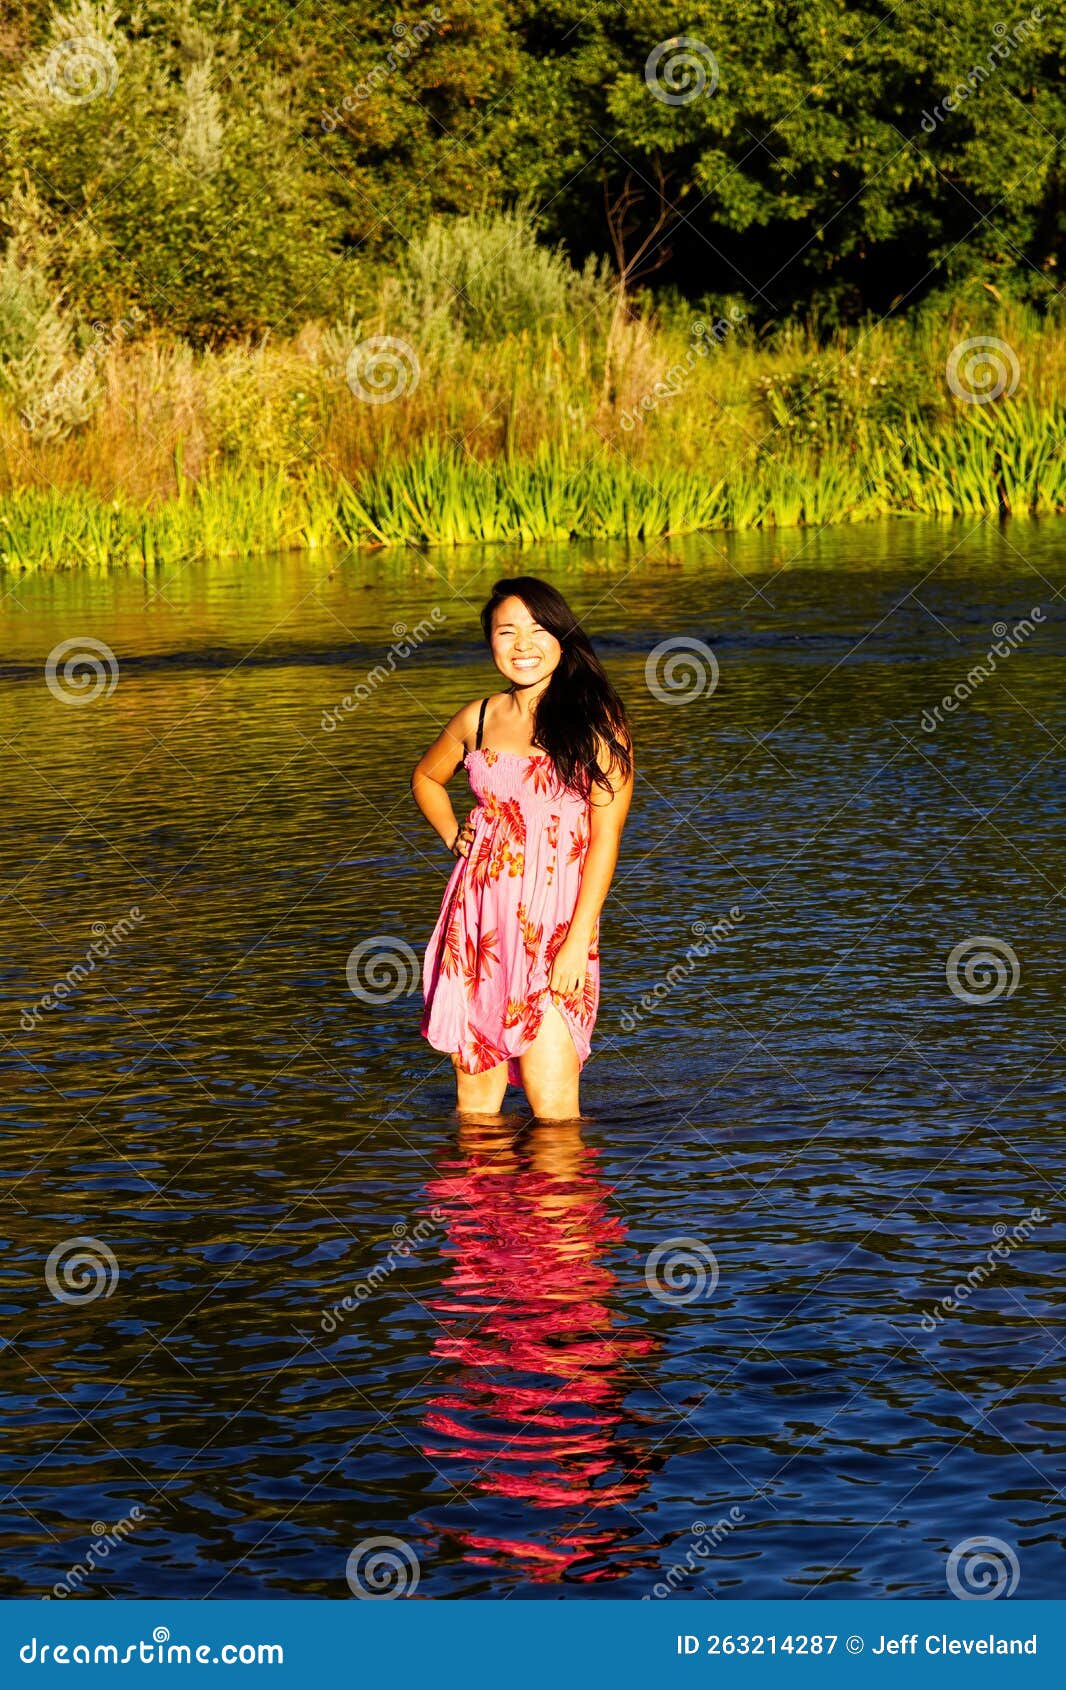 Japanese American Woman Standing In River Pink Dress Stock Image Image Of Squinting Japanese